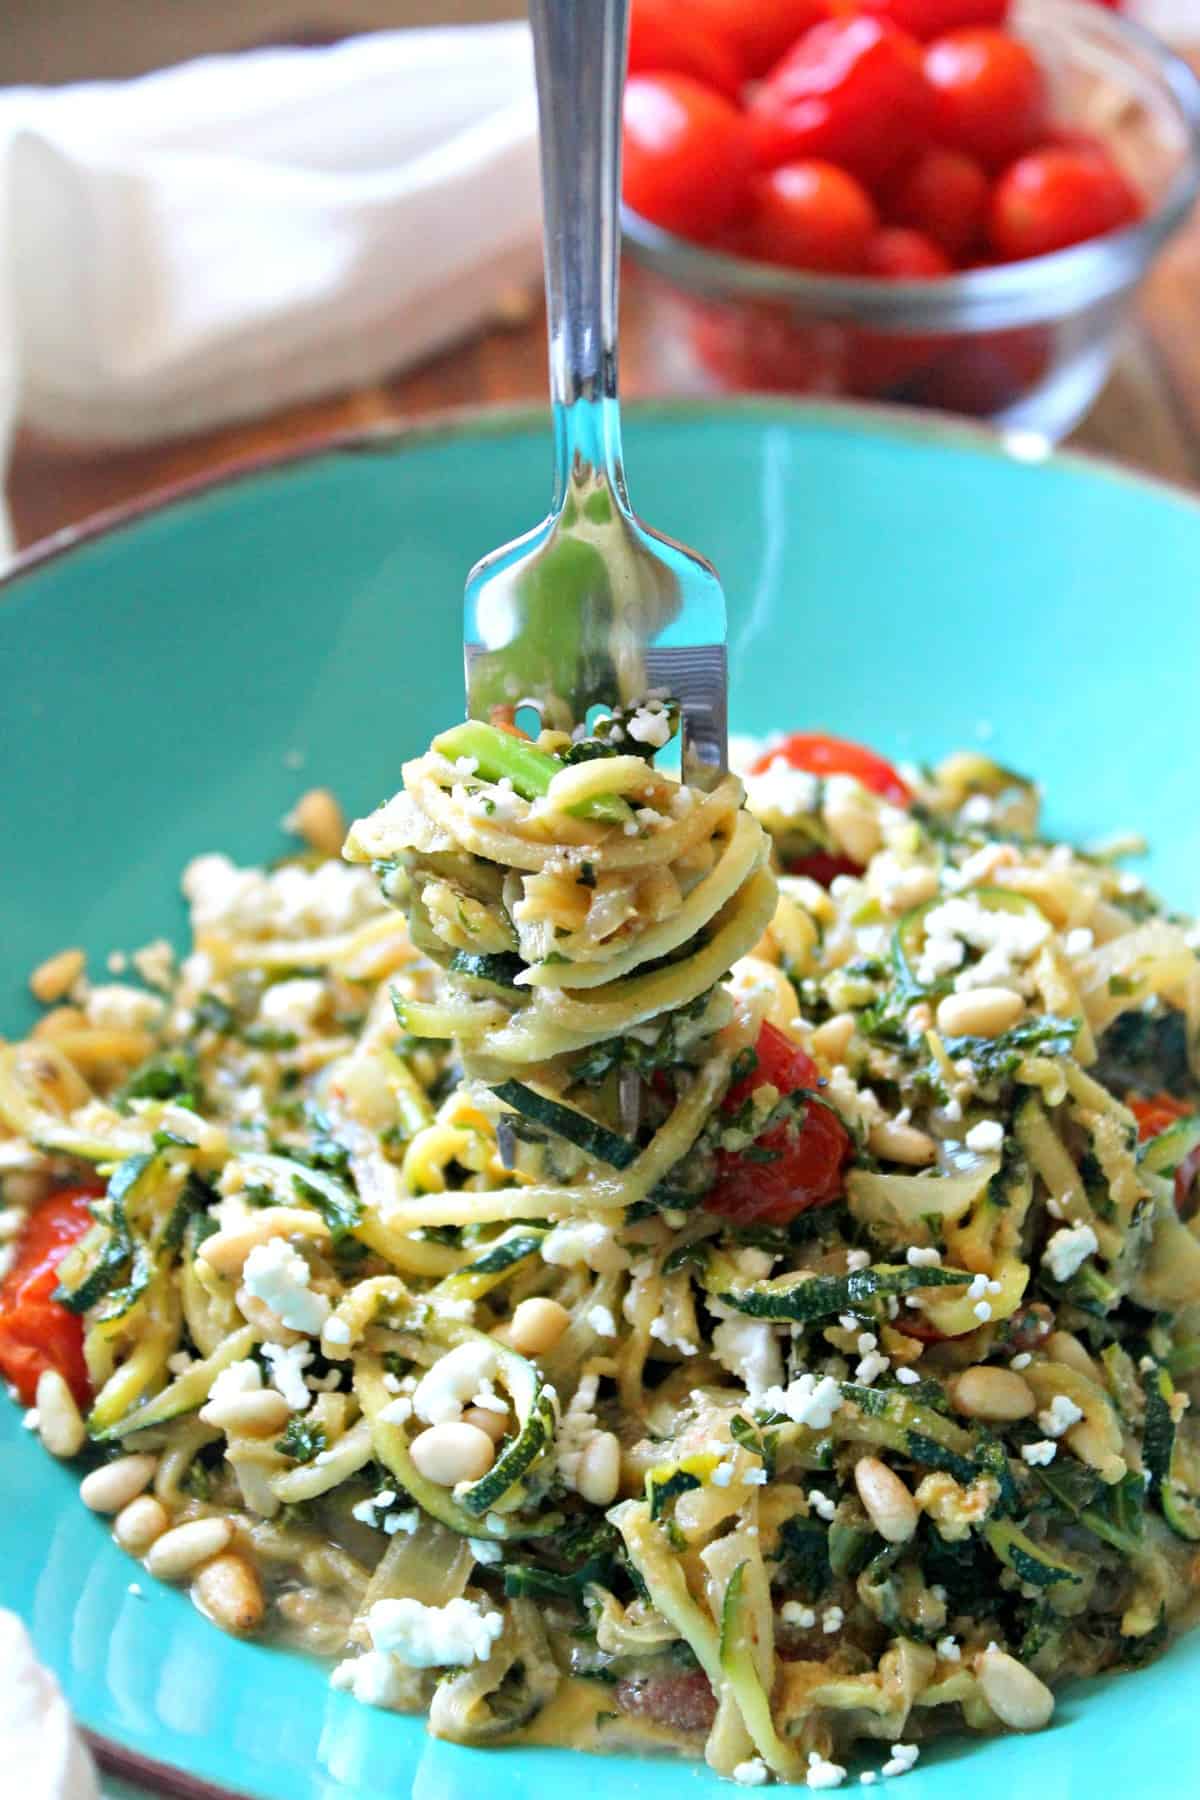 Guilt-free Zucchini pasta with kale, onions, goat cheese, and juicy roasted tomatoes